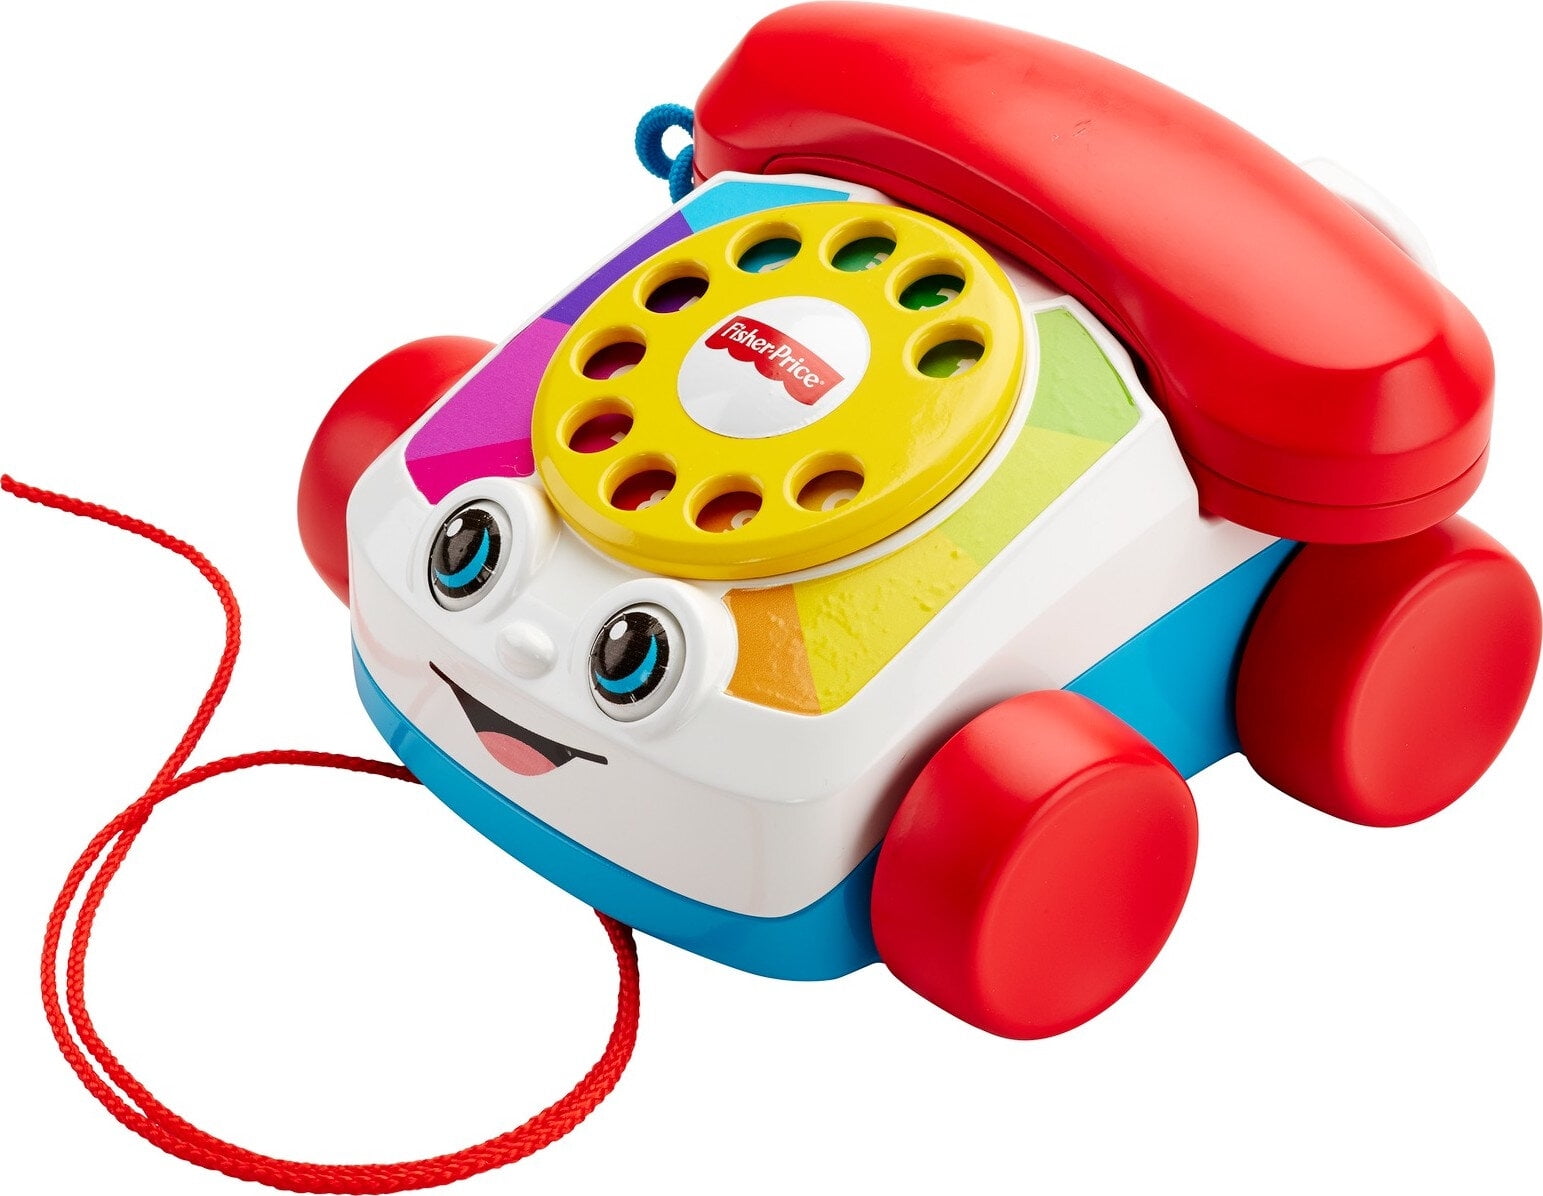 Baby Kid Musical Toy Mobile Phone Toddler Sound Hearing Learning Fisher Price 